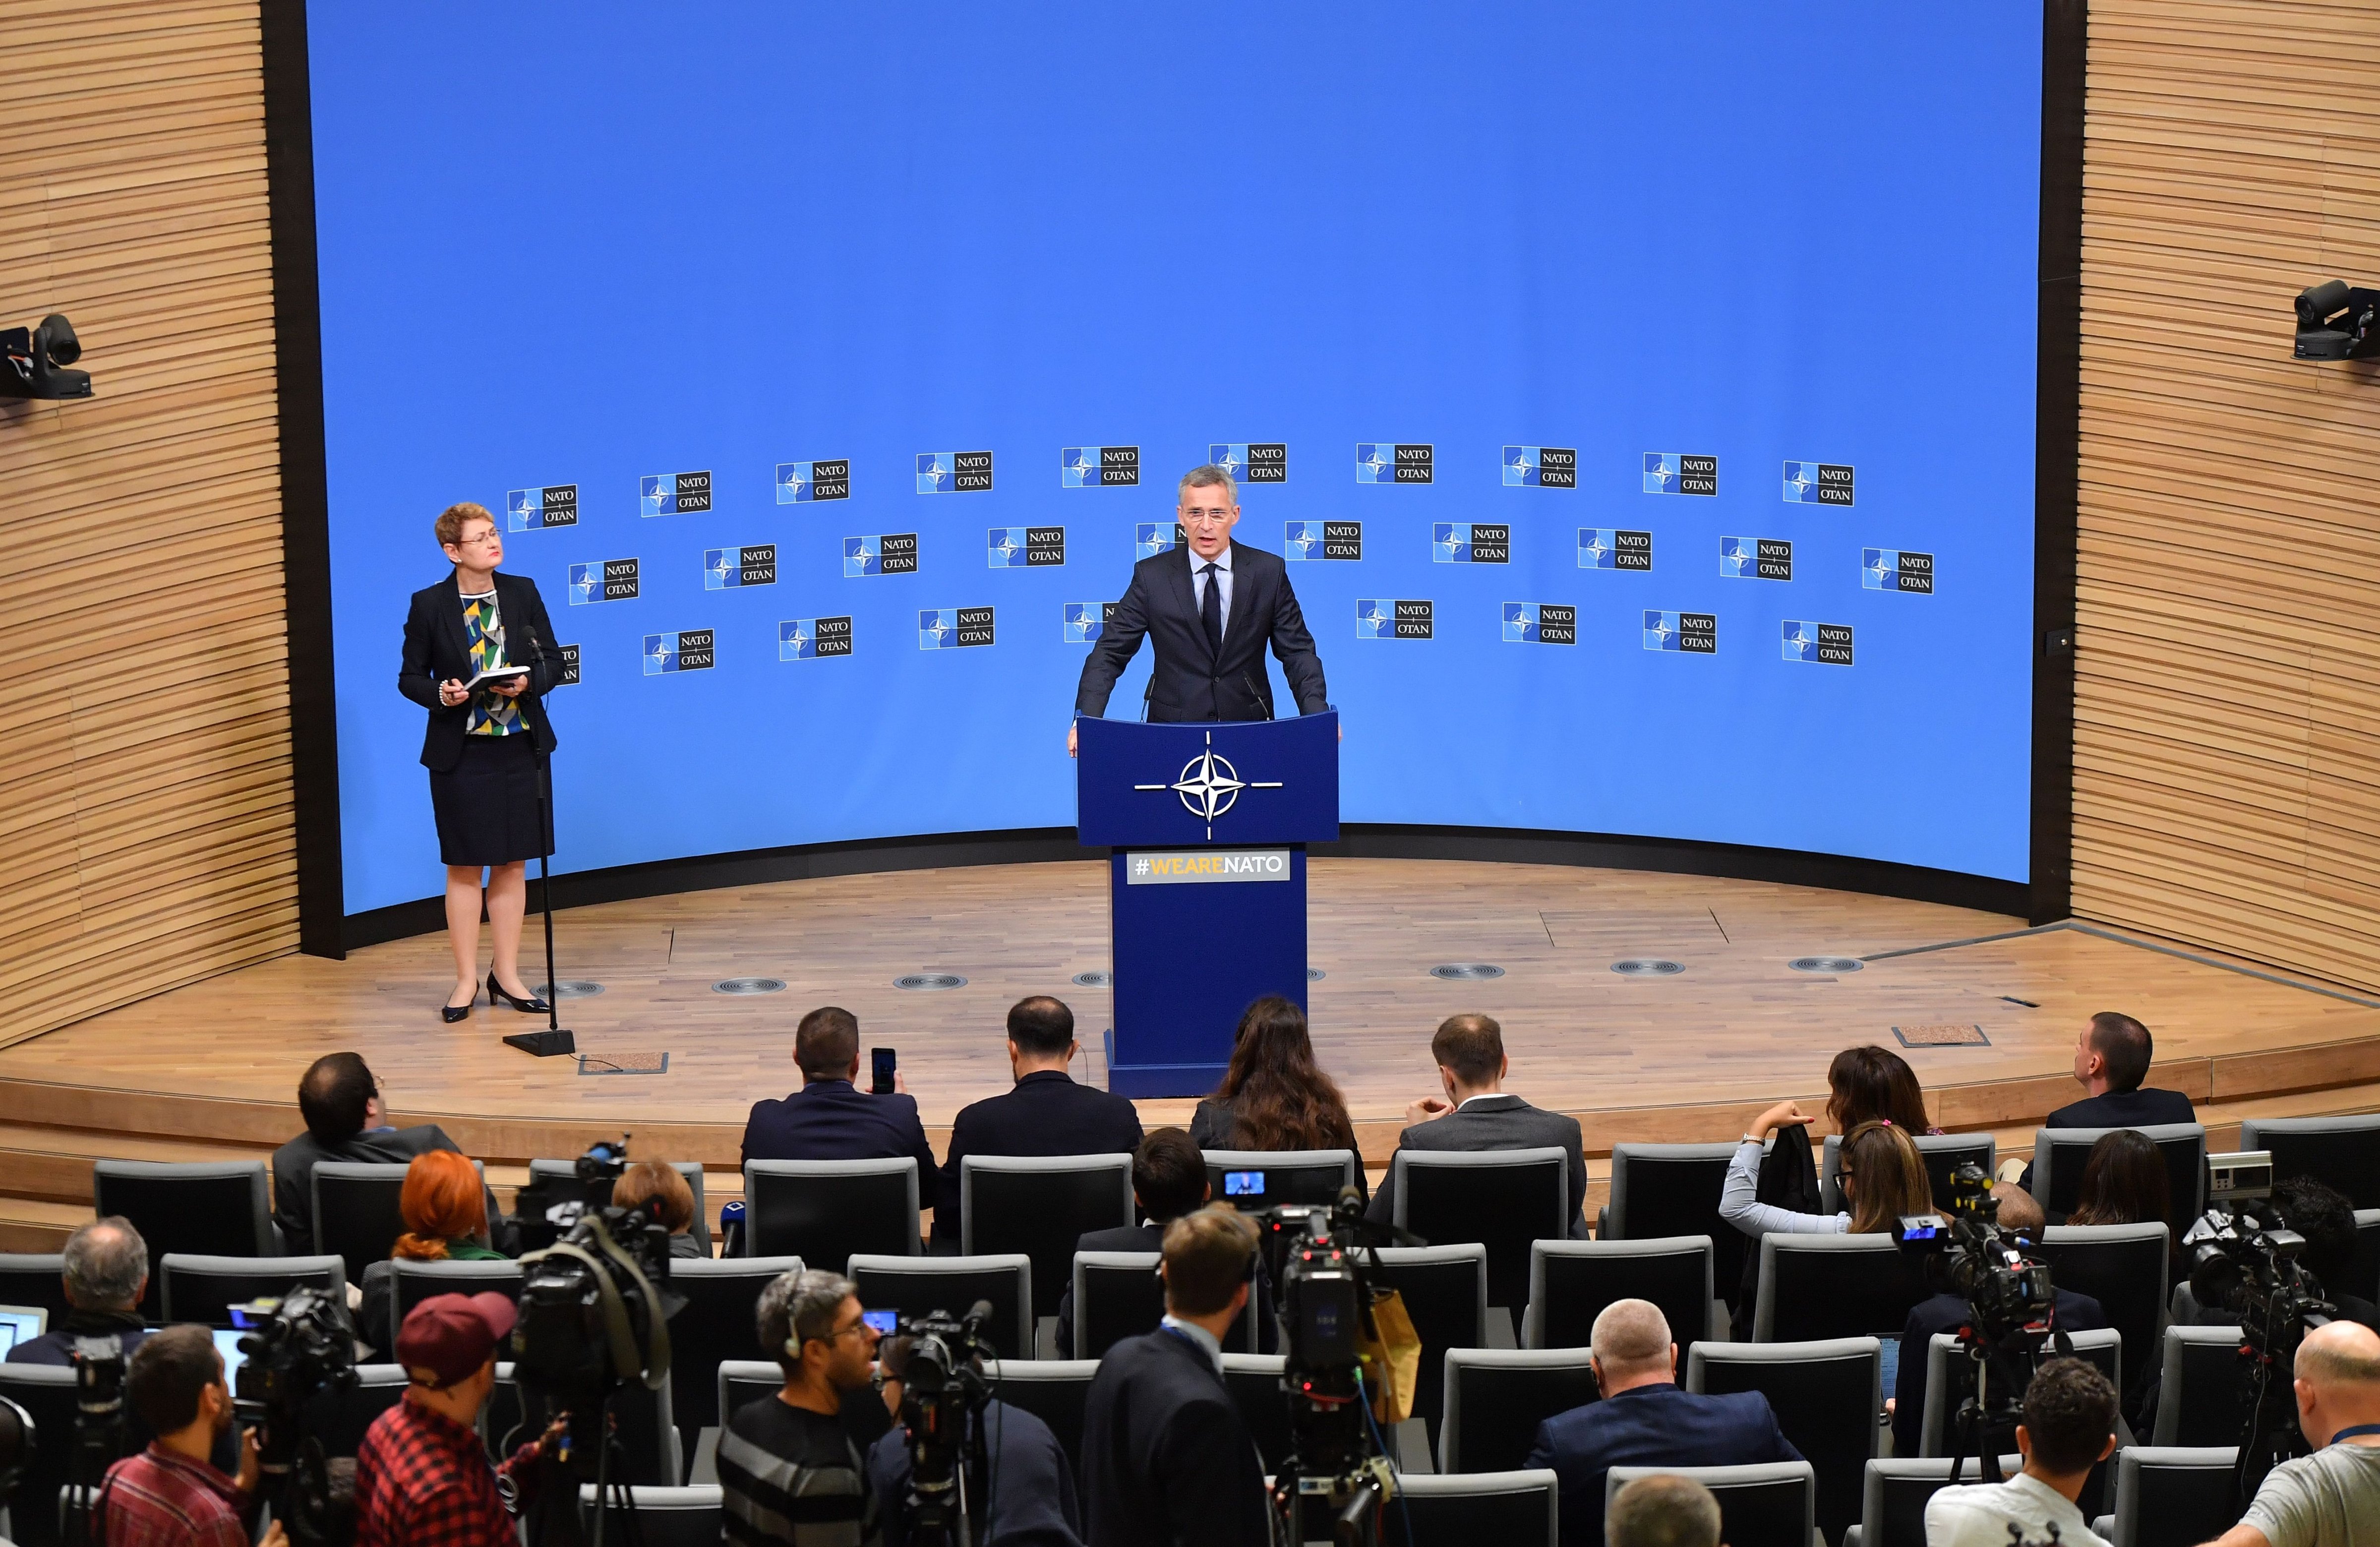 NATO Secretary General Jens Stoltenberg addresses a press conference ahead of a NATO defence ministerial meeting at NATO headquarters in Brussels on October 2, 2018. (EMMANUEL DUNAND&mdash;AFP/Getty Images)